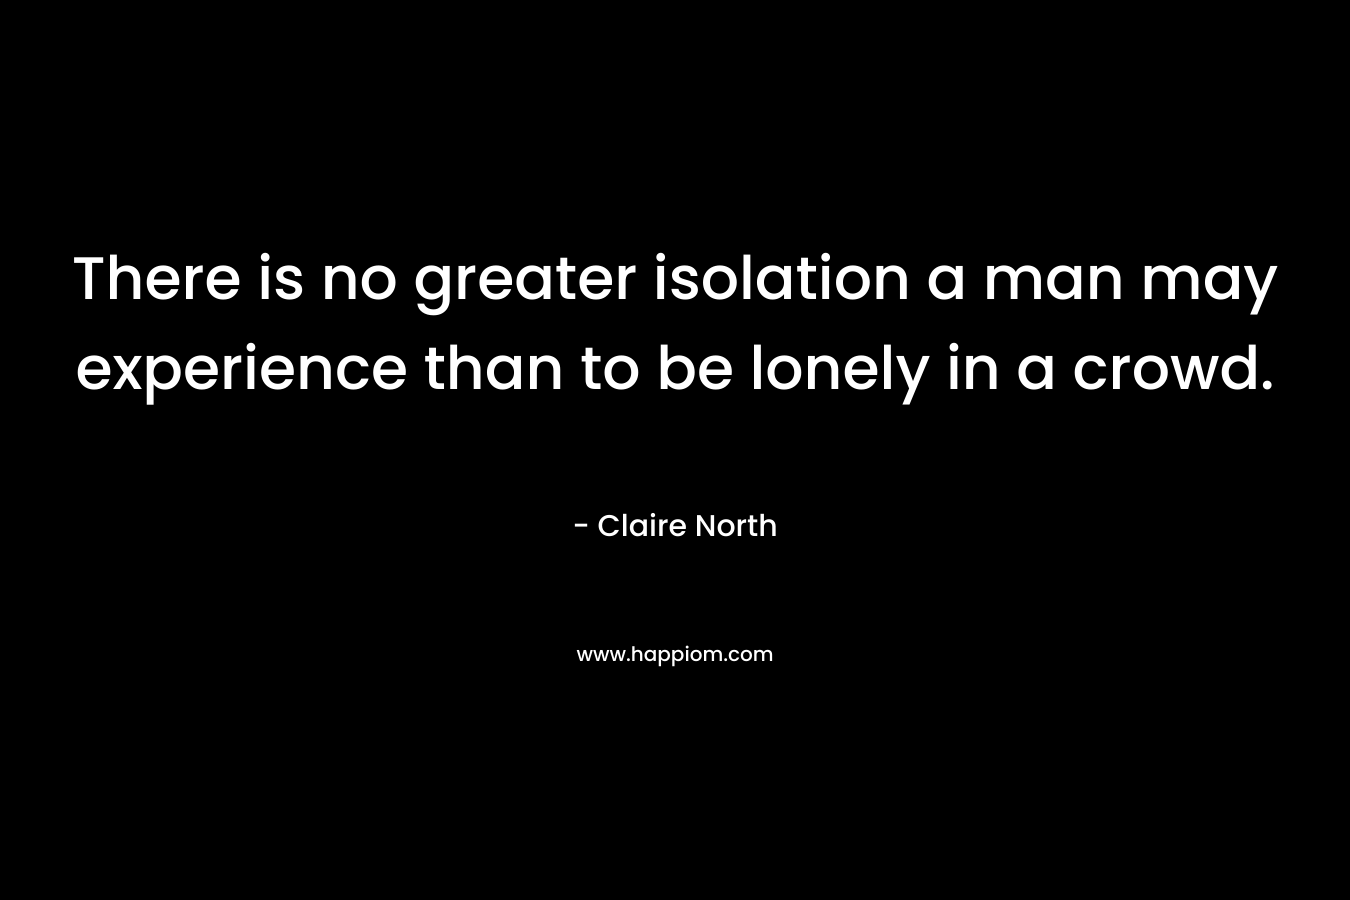 There is no greater isolation a man may experience than to be lonely in a crowd.